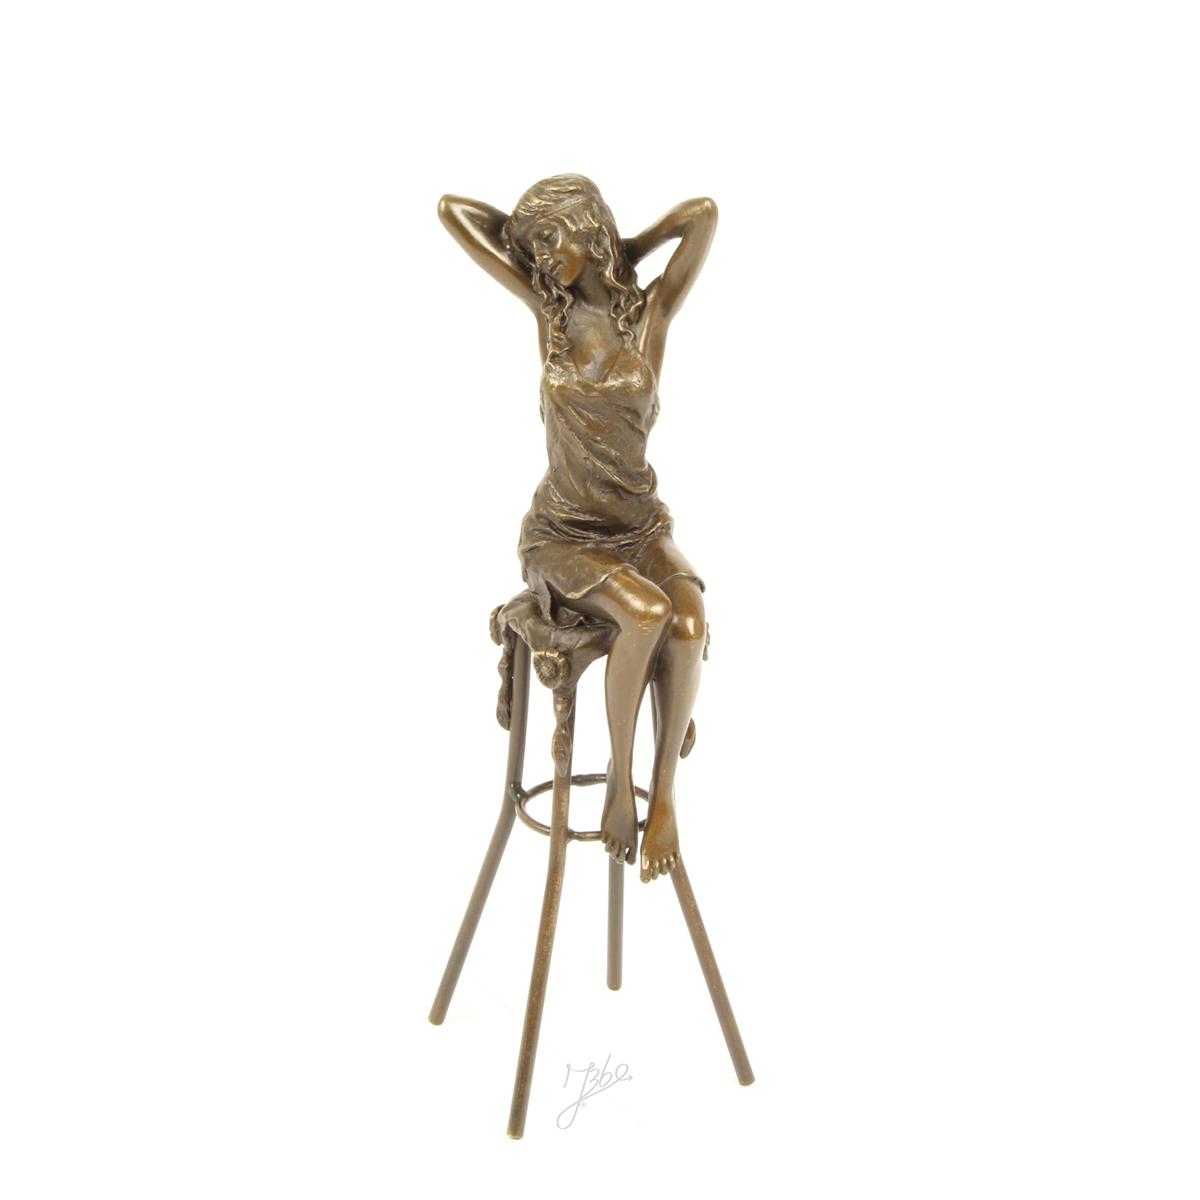 A BRONZE SCULPTURE OF A LADY ON BARCHAIR